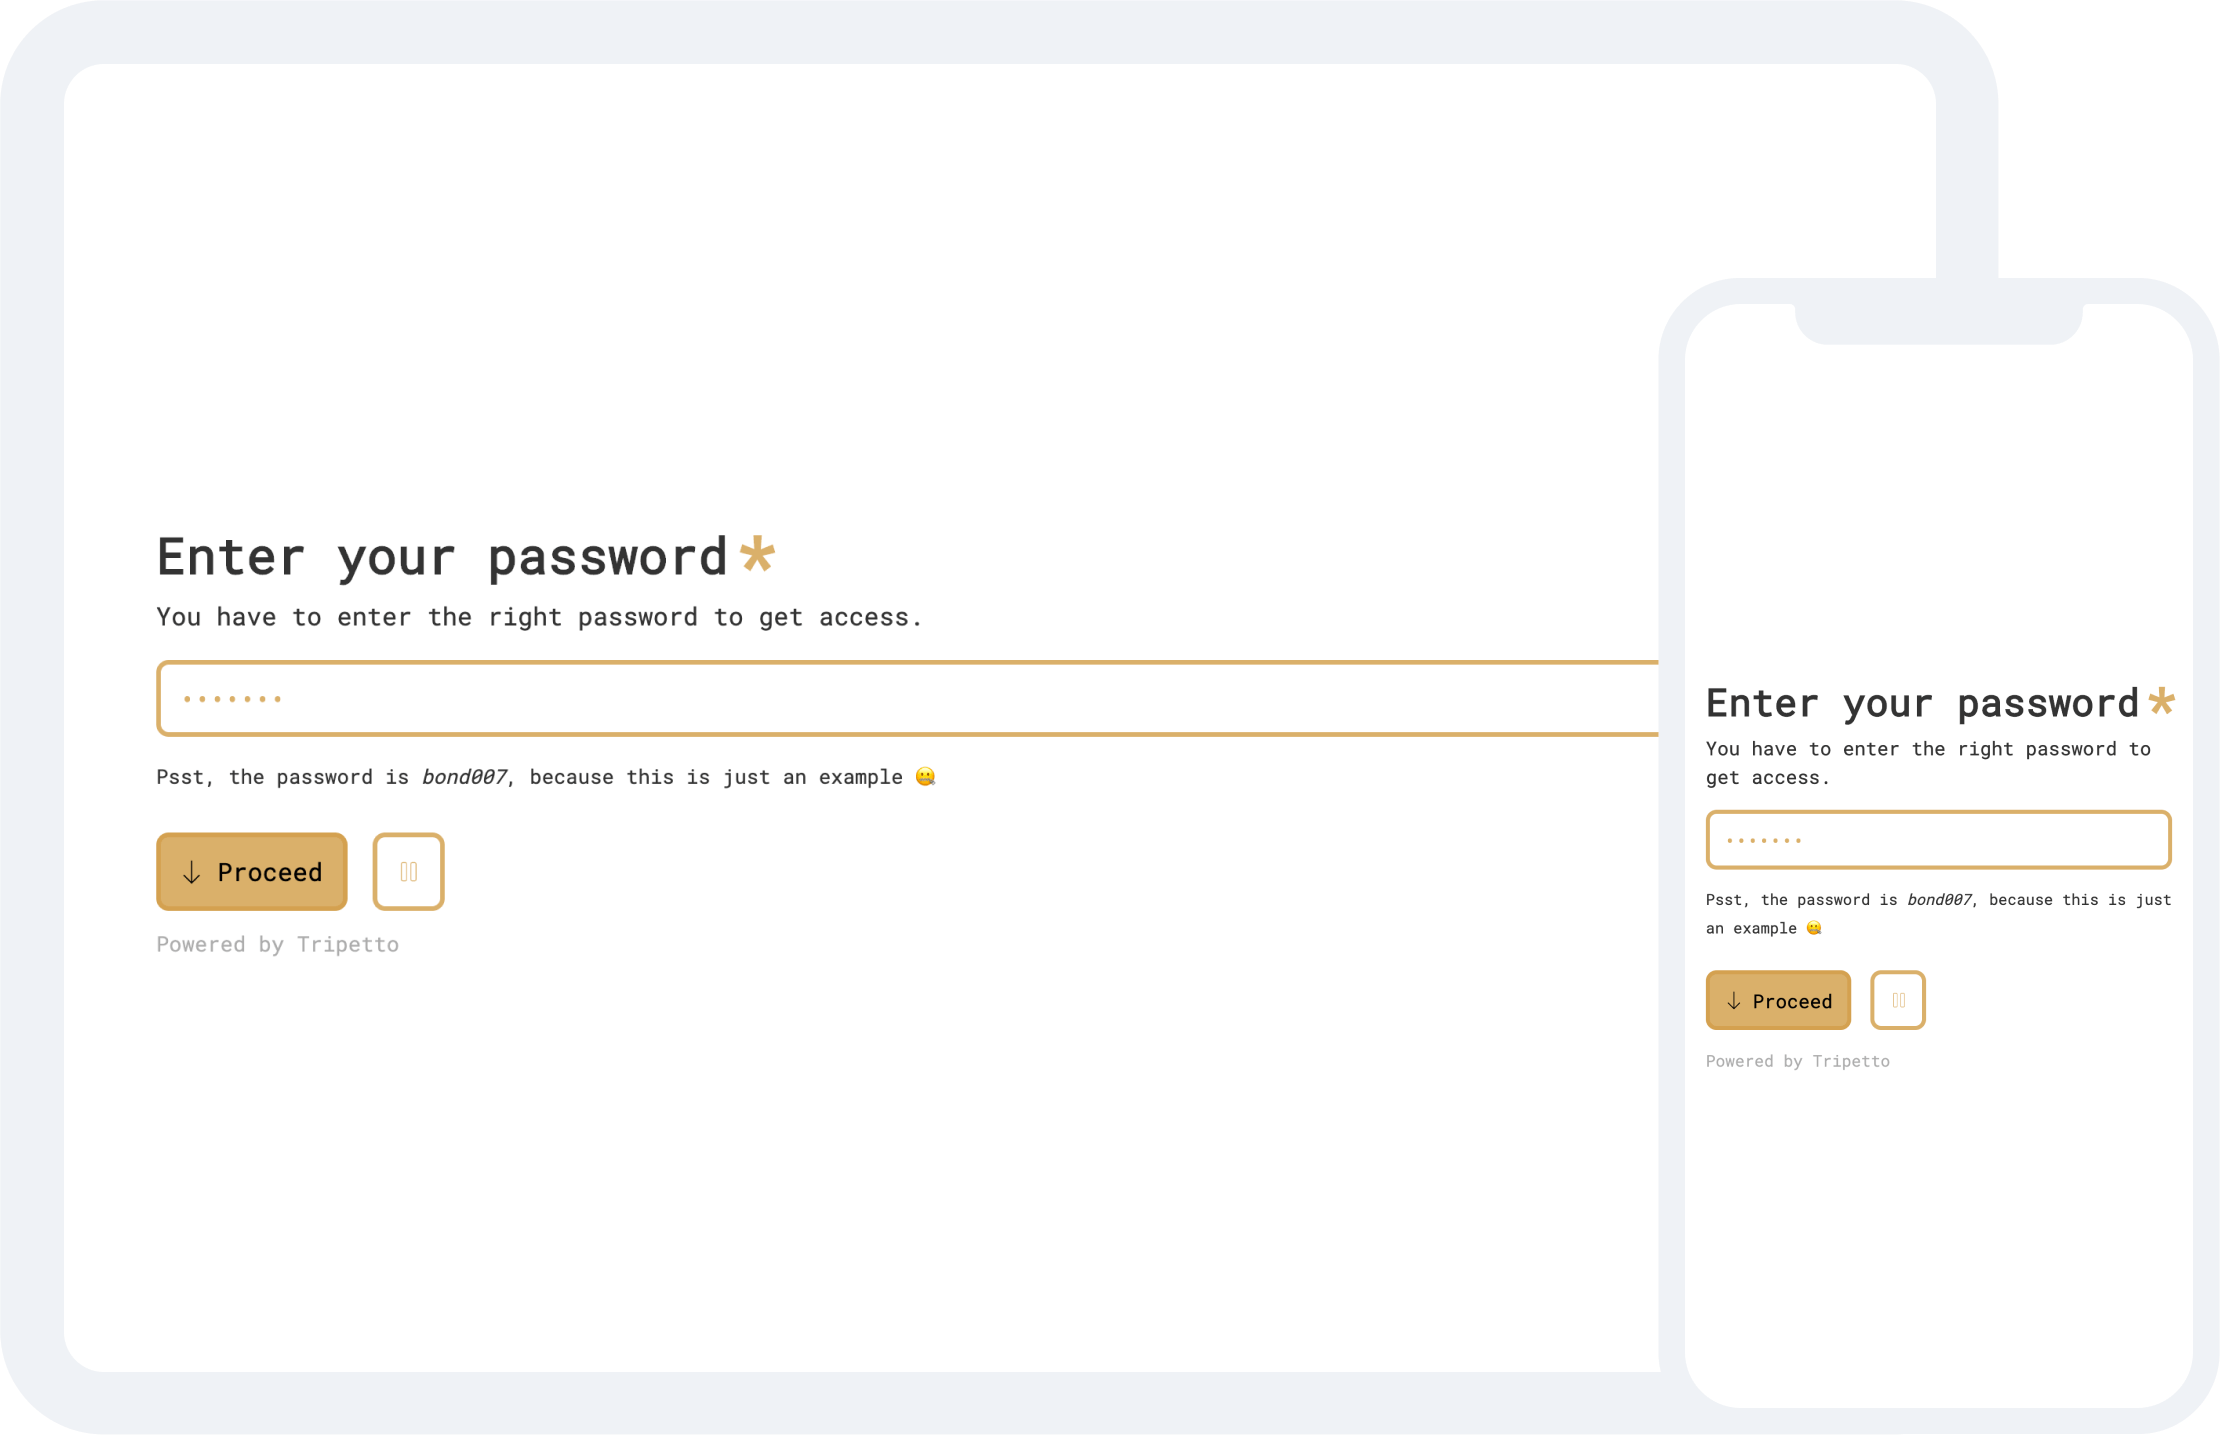 Screenshots of a secure, password protected form in the autoscroll form face, shown on a tablet and a mobile phone.